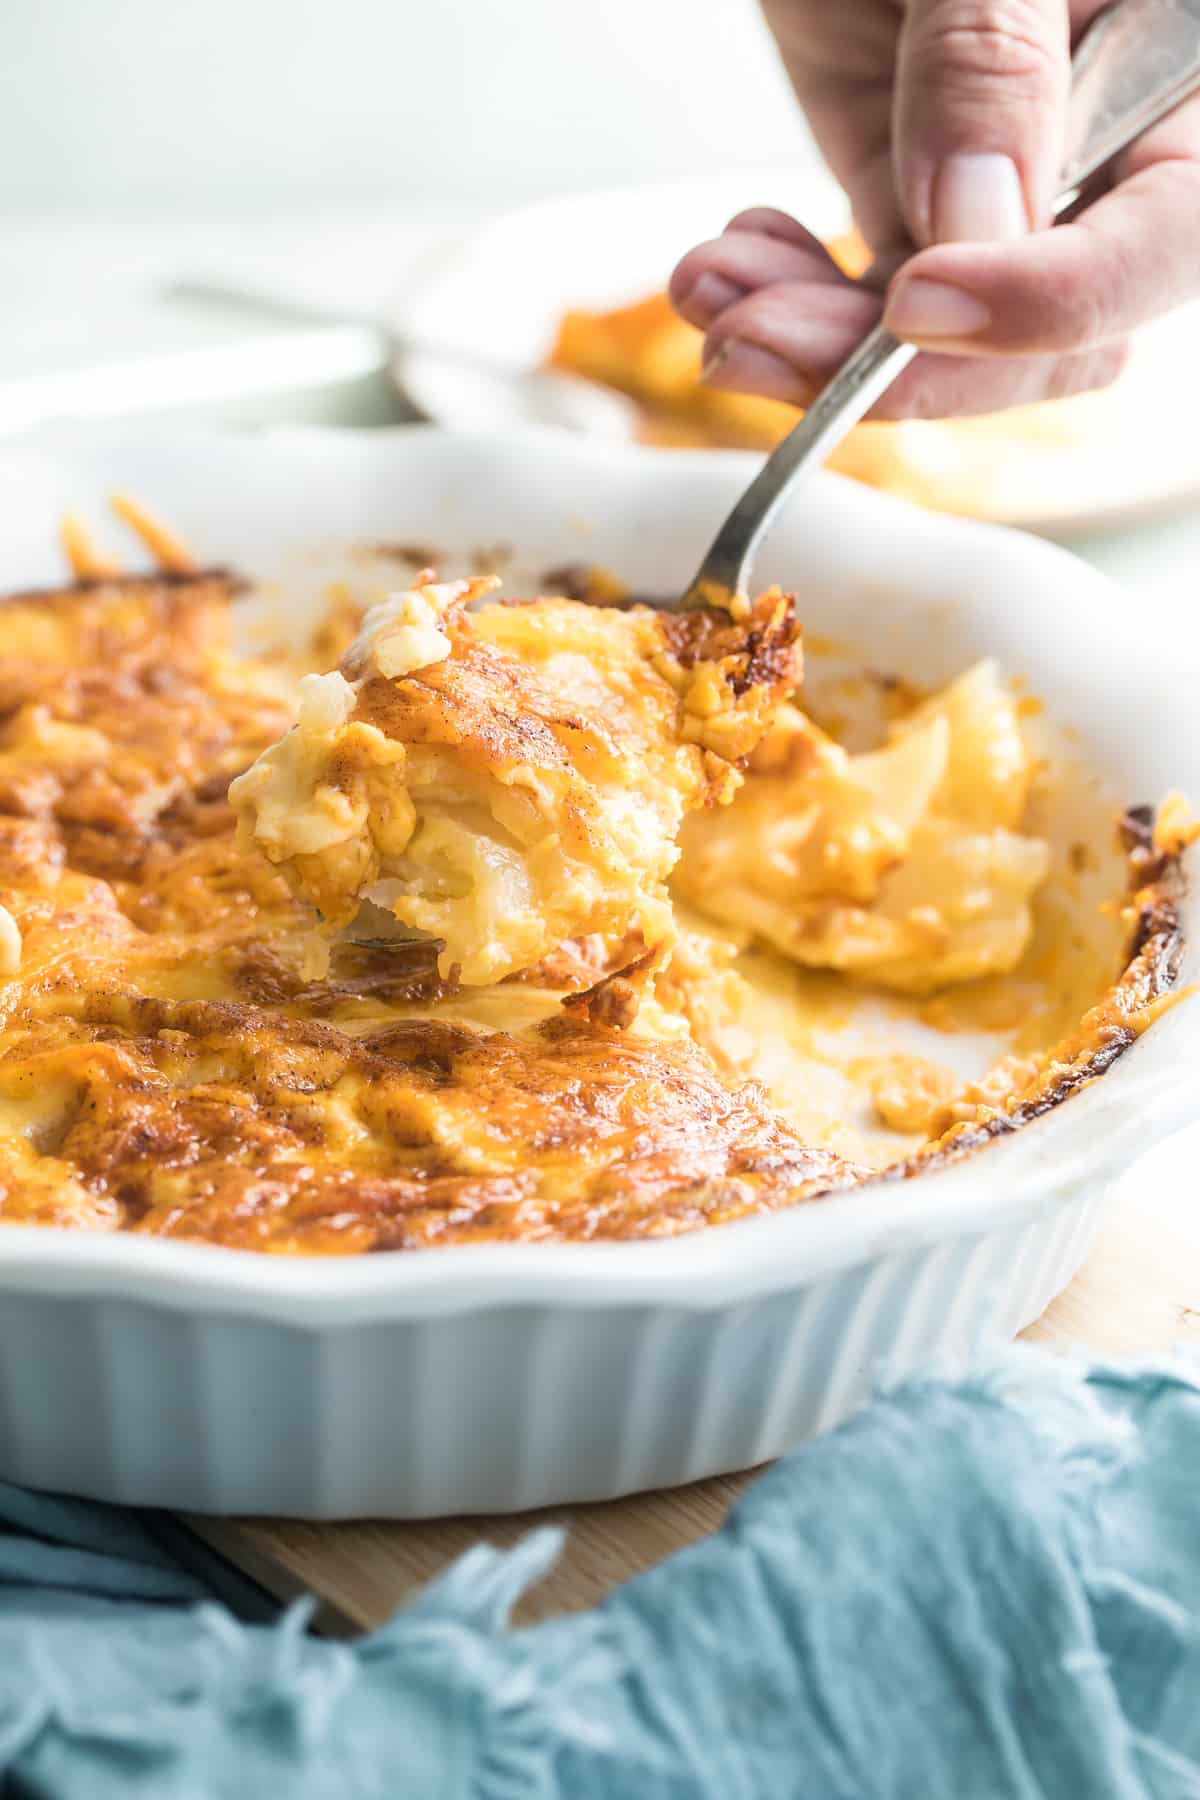 Scalloped potatoes in a white baking dish.